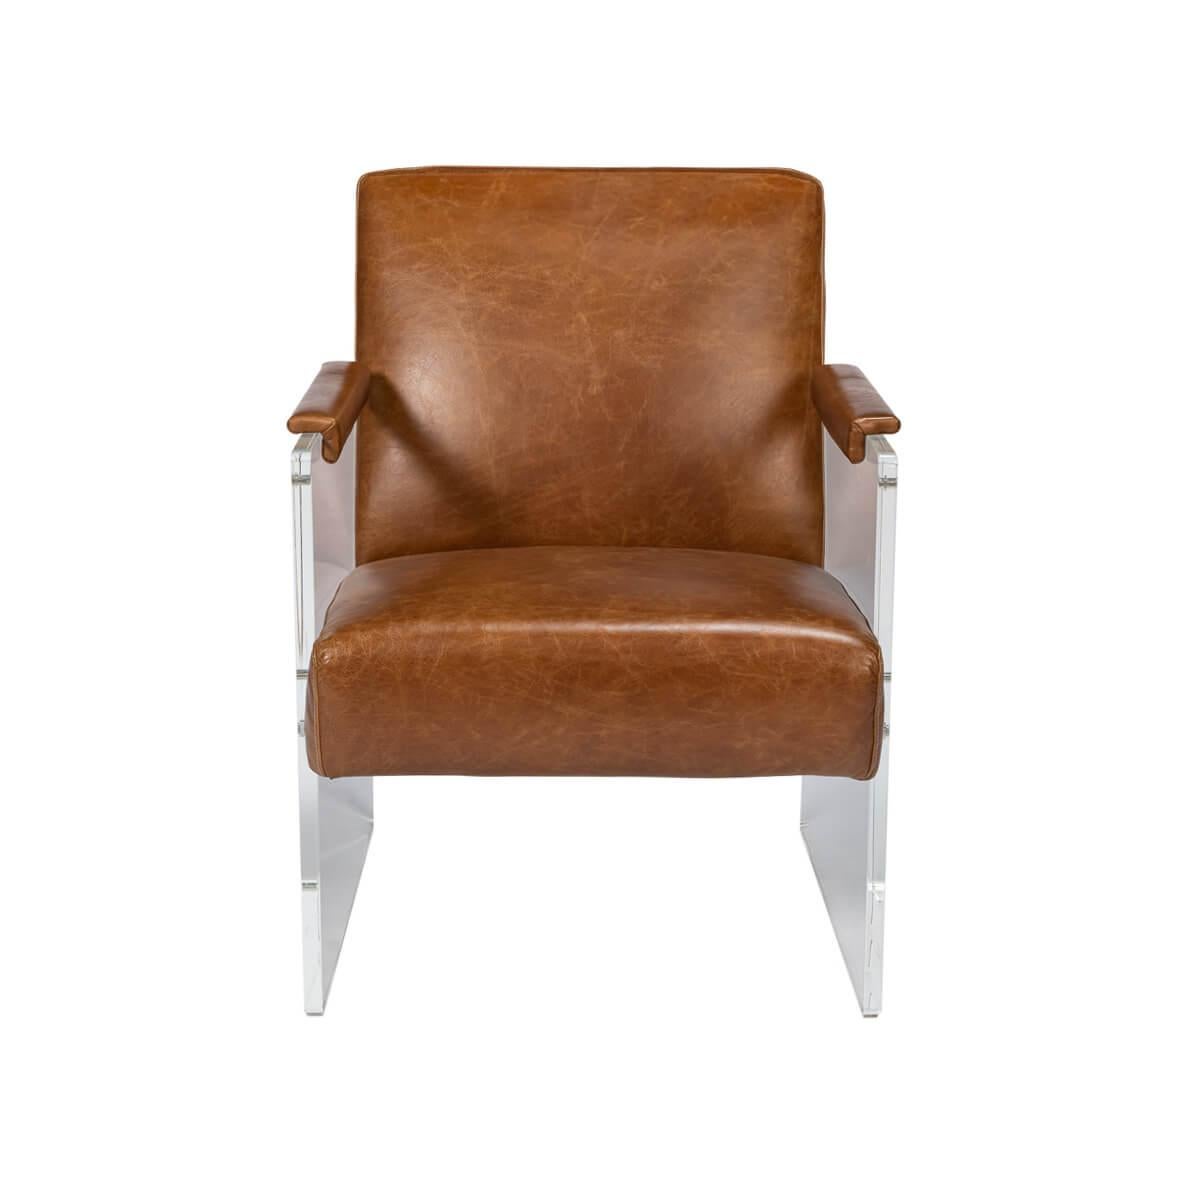 This chair features a sleek, Cuba Brown leather seat and backrest that provide a luxurious sitting experience, contrasted with clear acrylic side panels that give the illusion of floating in the air.

The transparent structure is fastened with